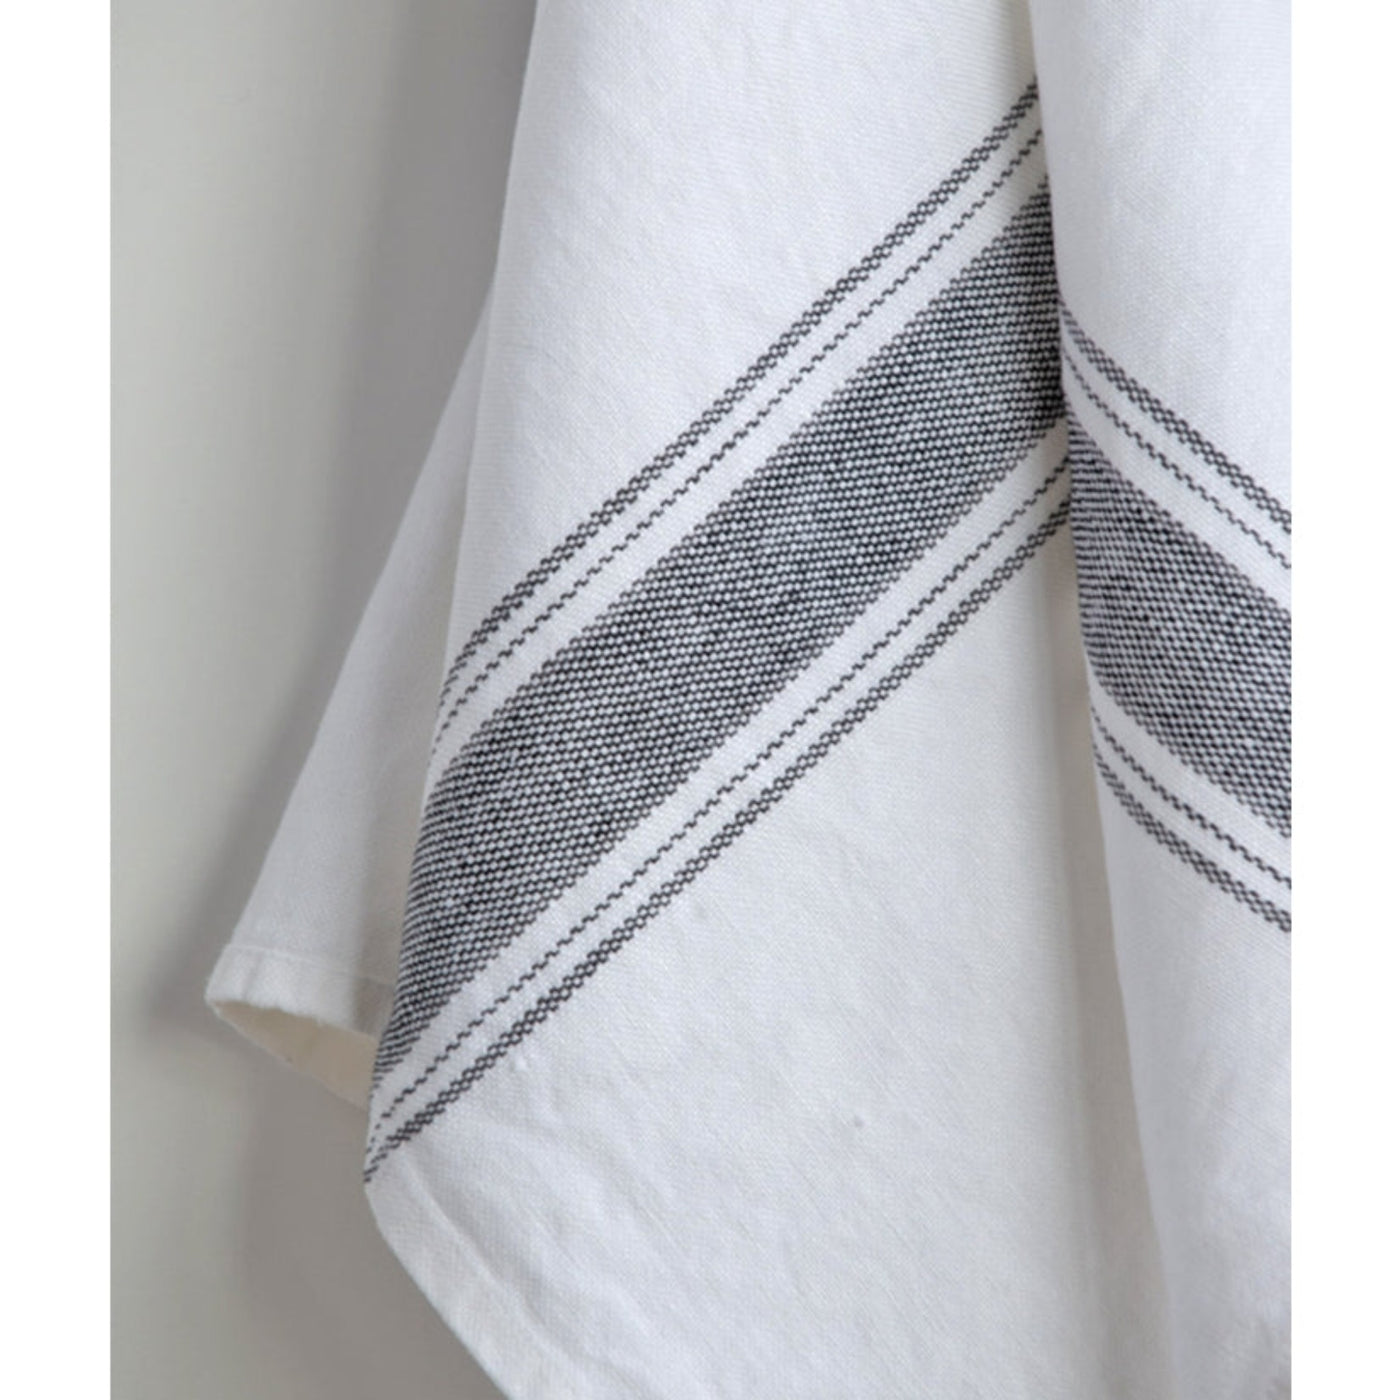 Farmhouse Linen Tea / Guest Towels: Off White with charcoal-grey stripes